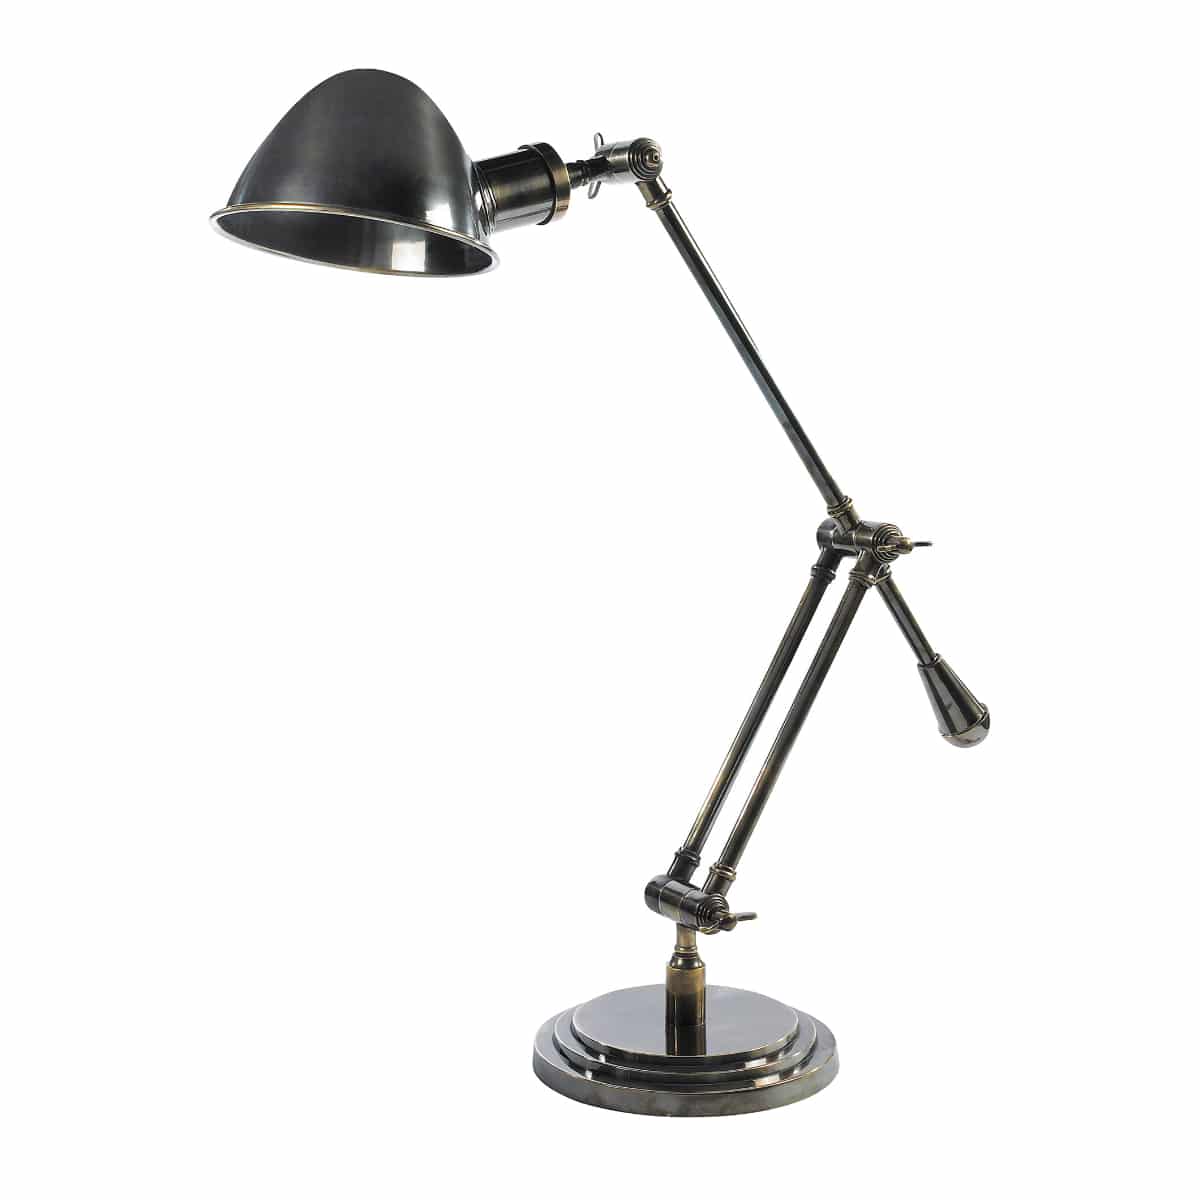 Lamp Ing Guide How To Pick The, How To Tighten A Loose Table Lamp